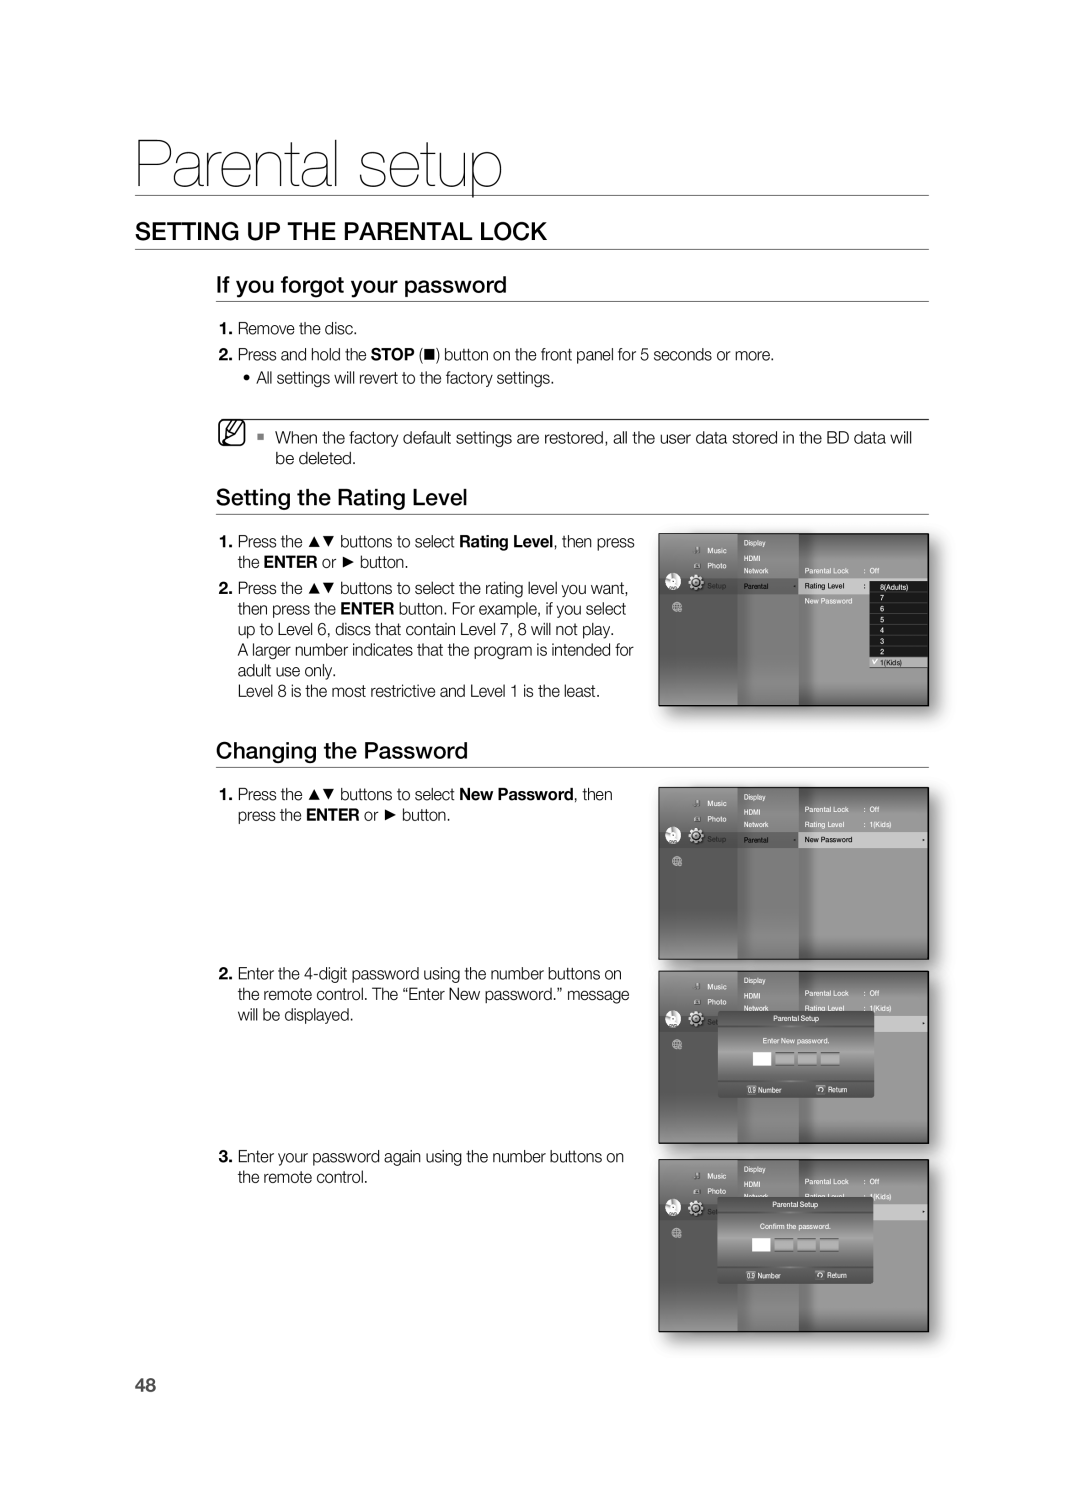 Samsung HT-BD8200 user manual If you forgot your password, Setting the Rating Level, Changing the Password, Parental setup 